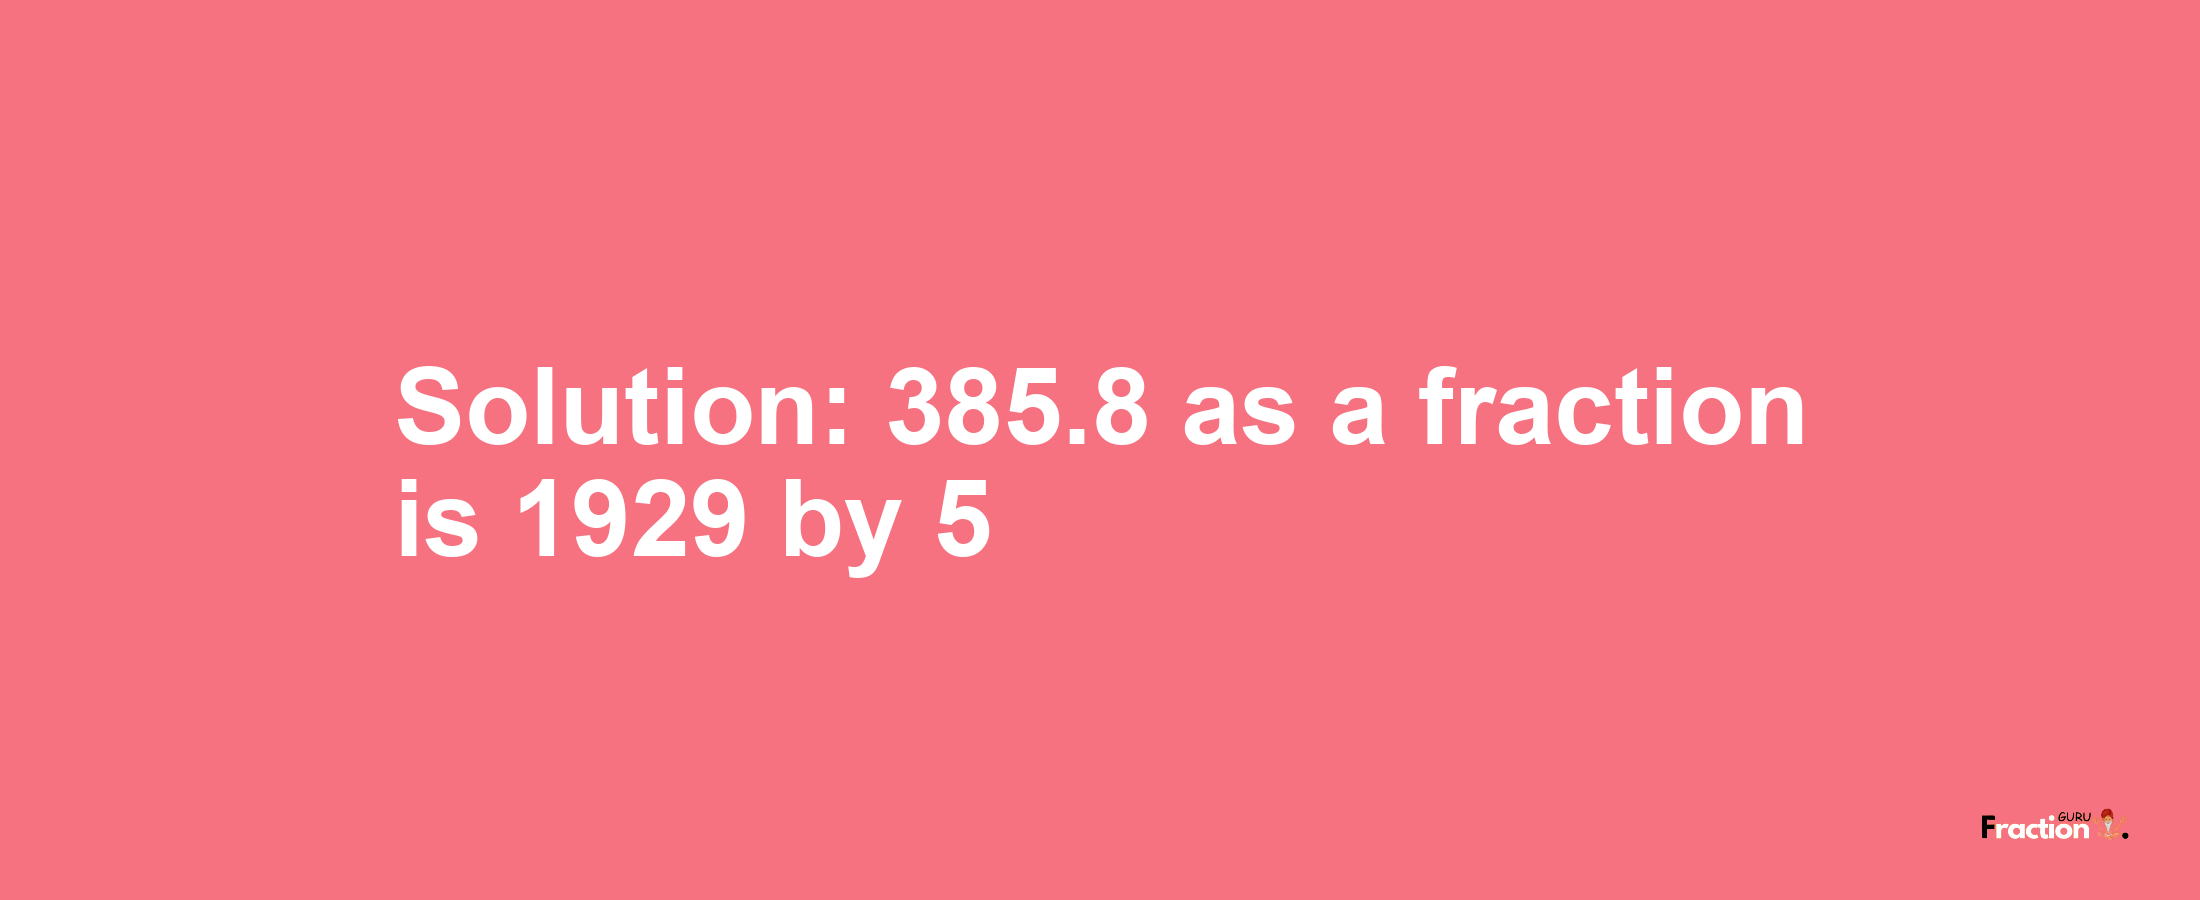 Solution:385.8 as a fraction is 1929/5